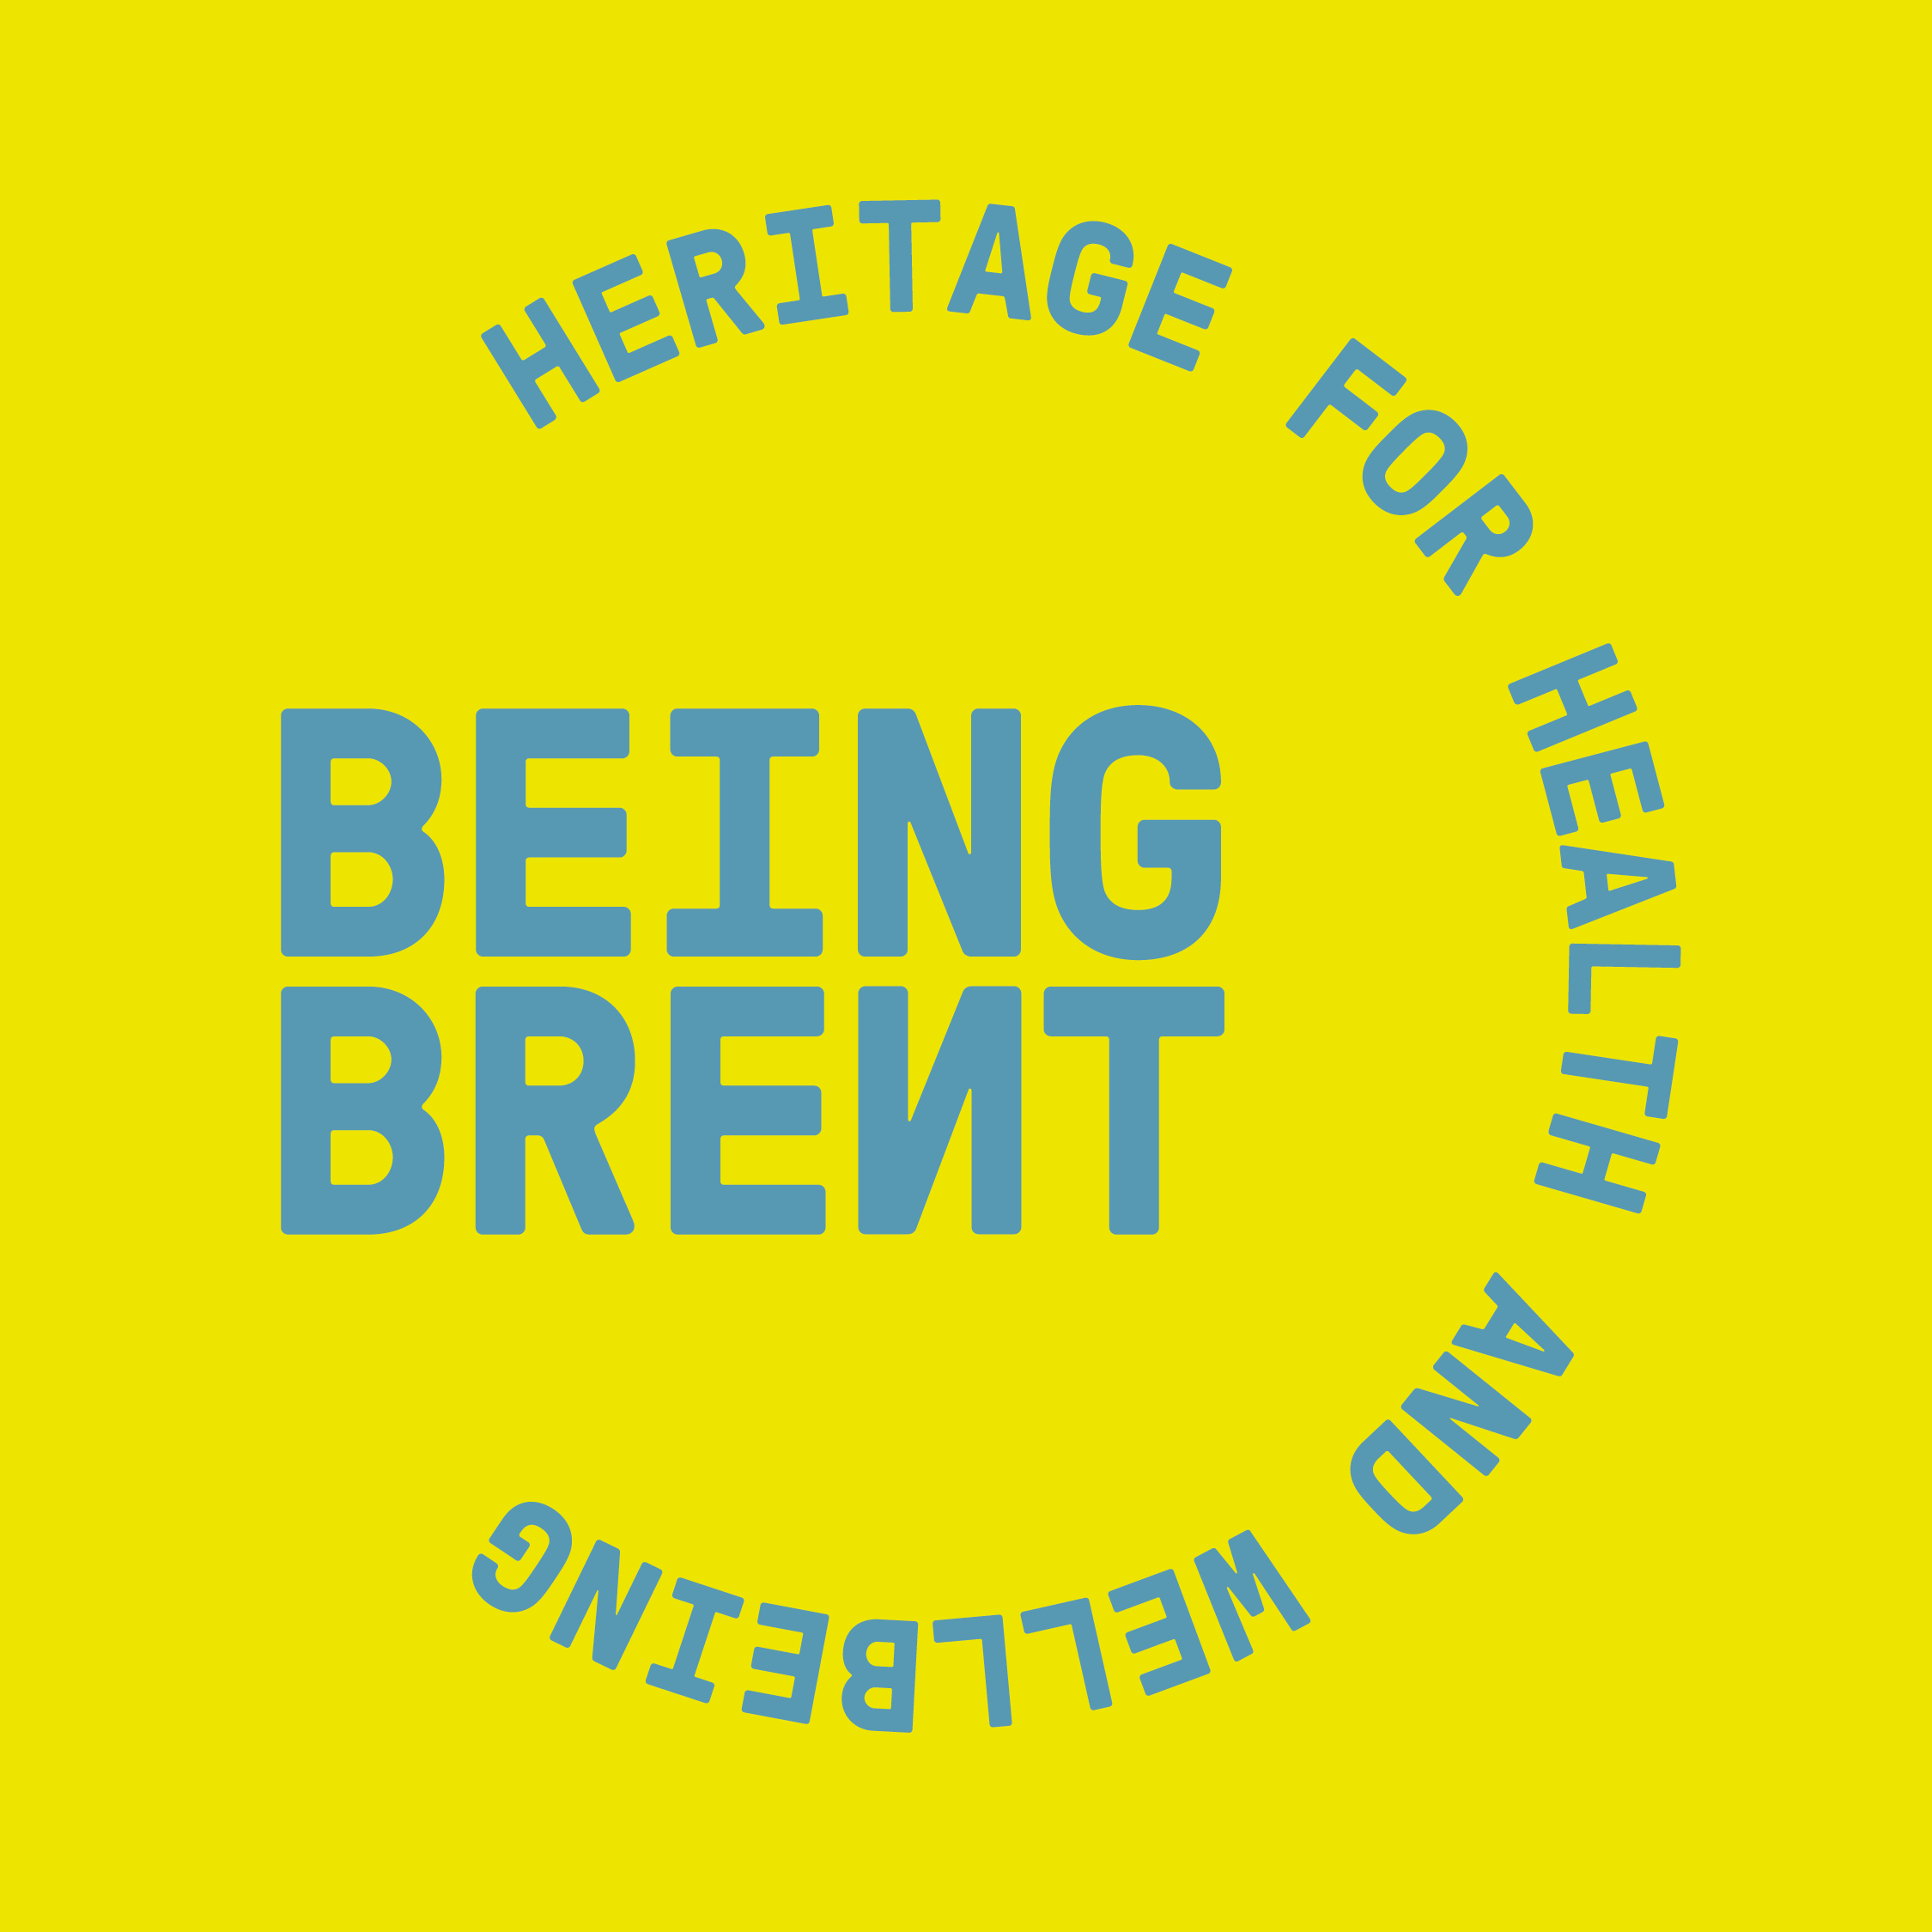 Heritage for health and wellbeing logo